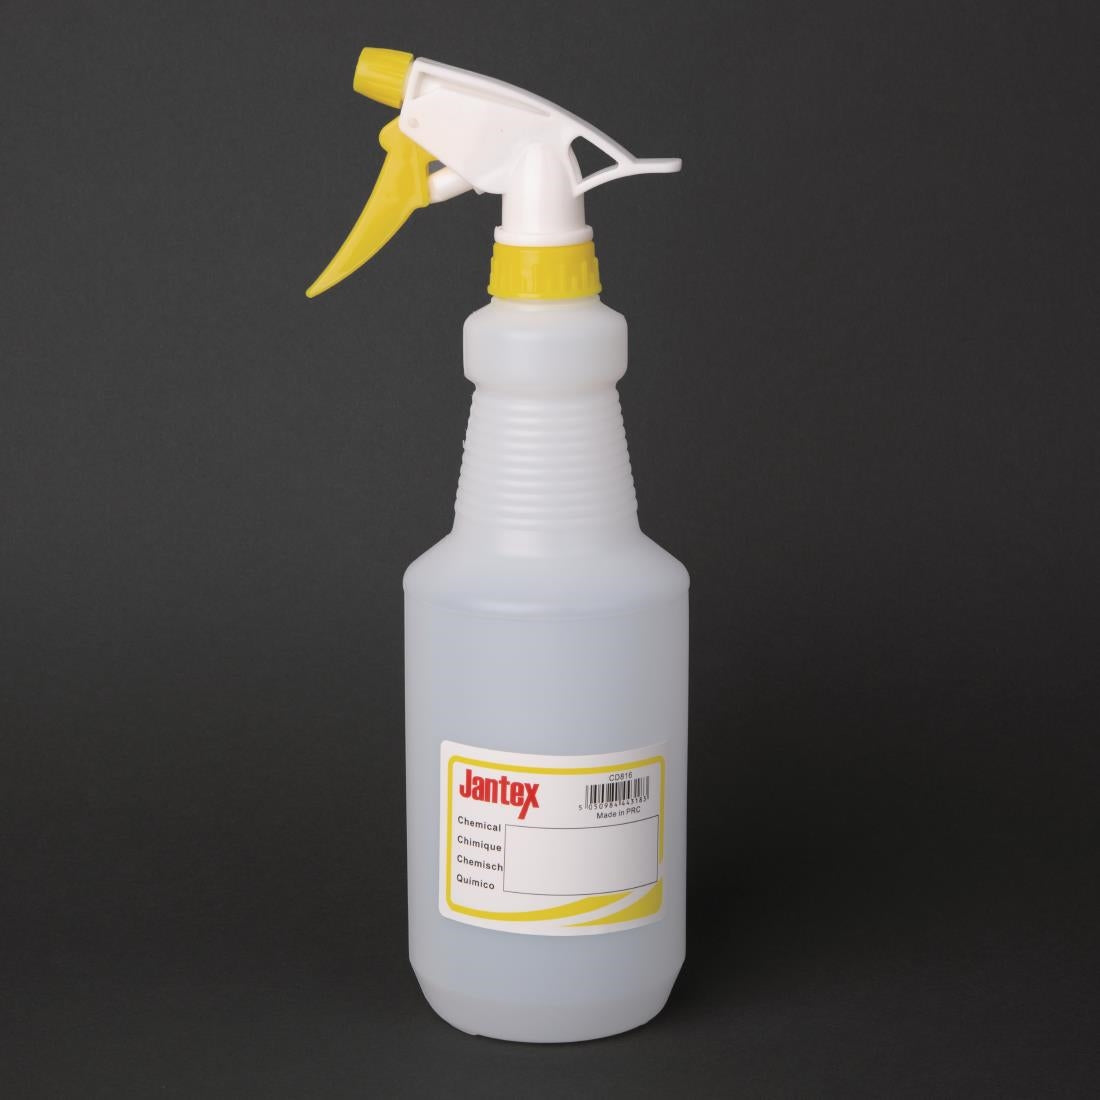 CD816 Jantex Colour-Coded Trigger Spray Bottle Yellow 750ml JD Catering Equipment Solutions Ltd